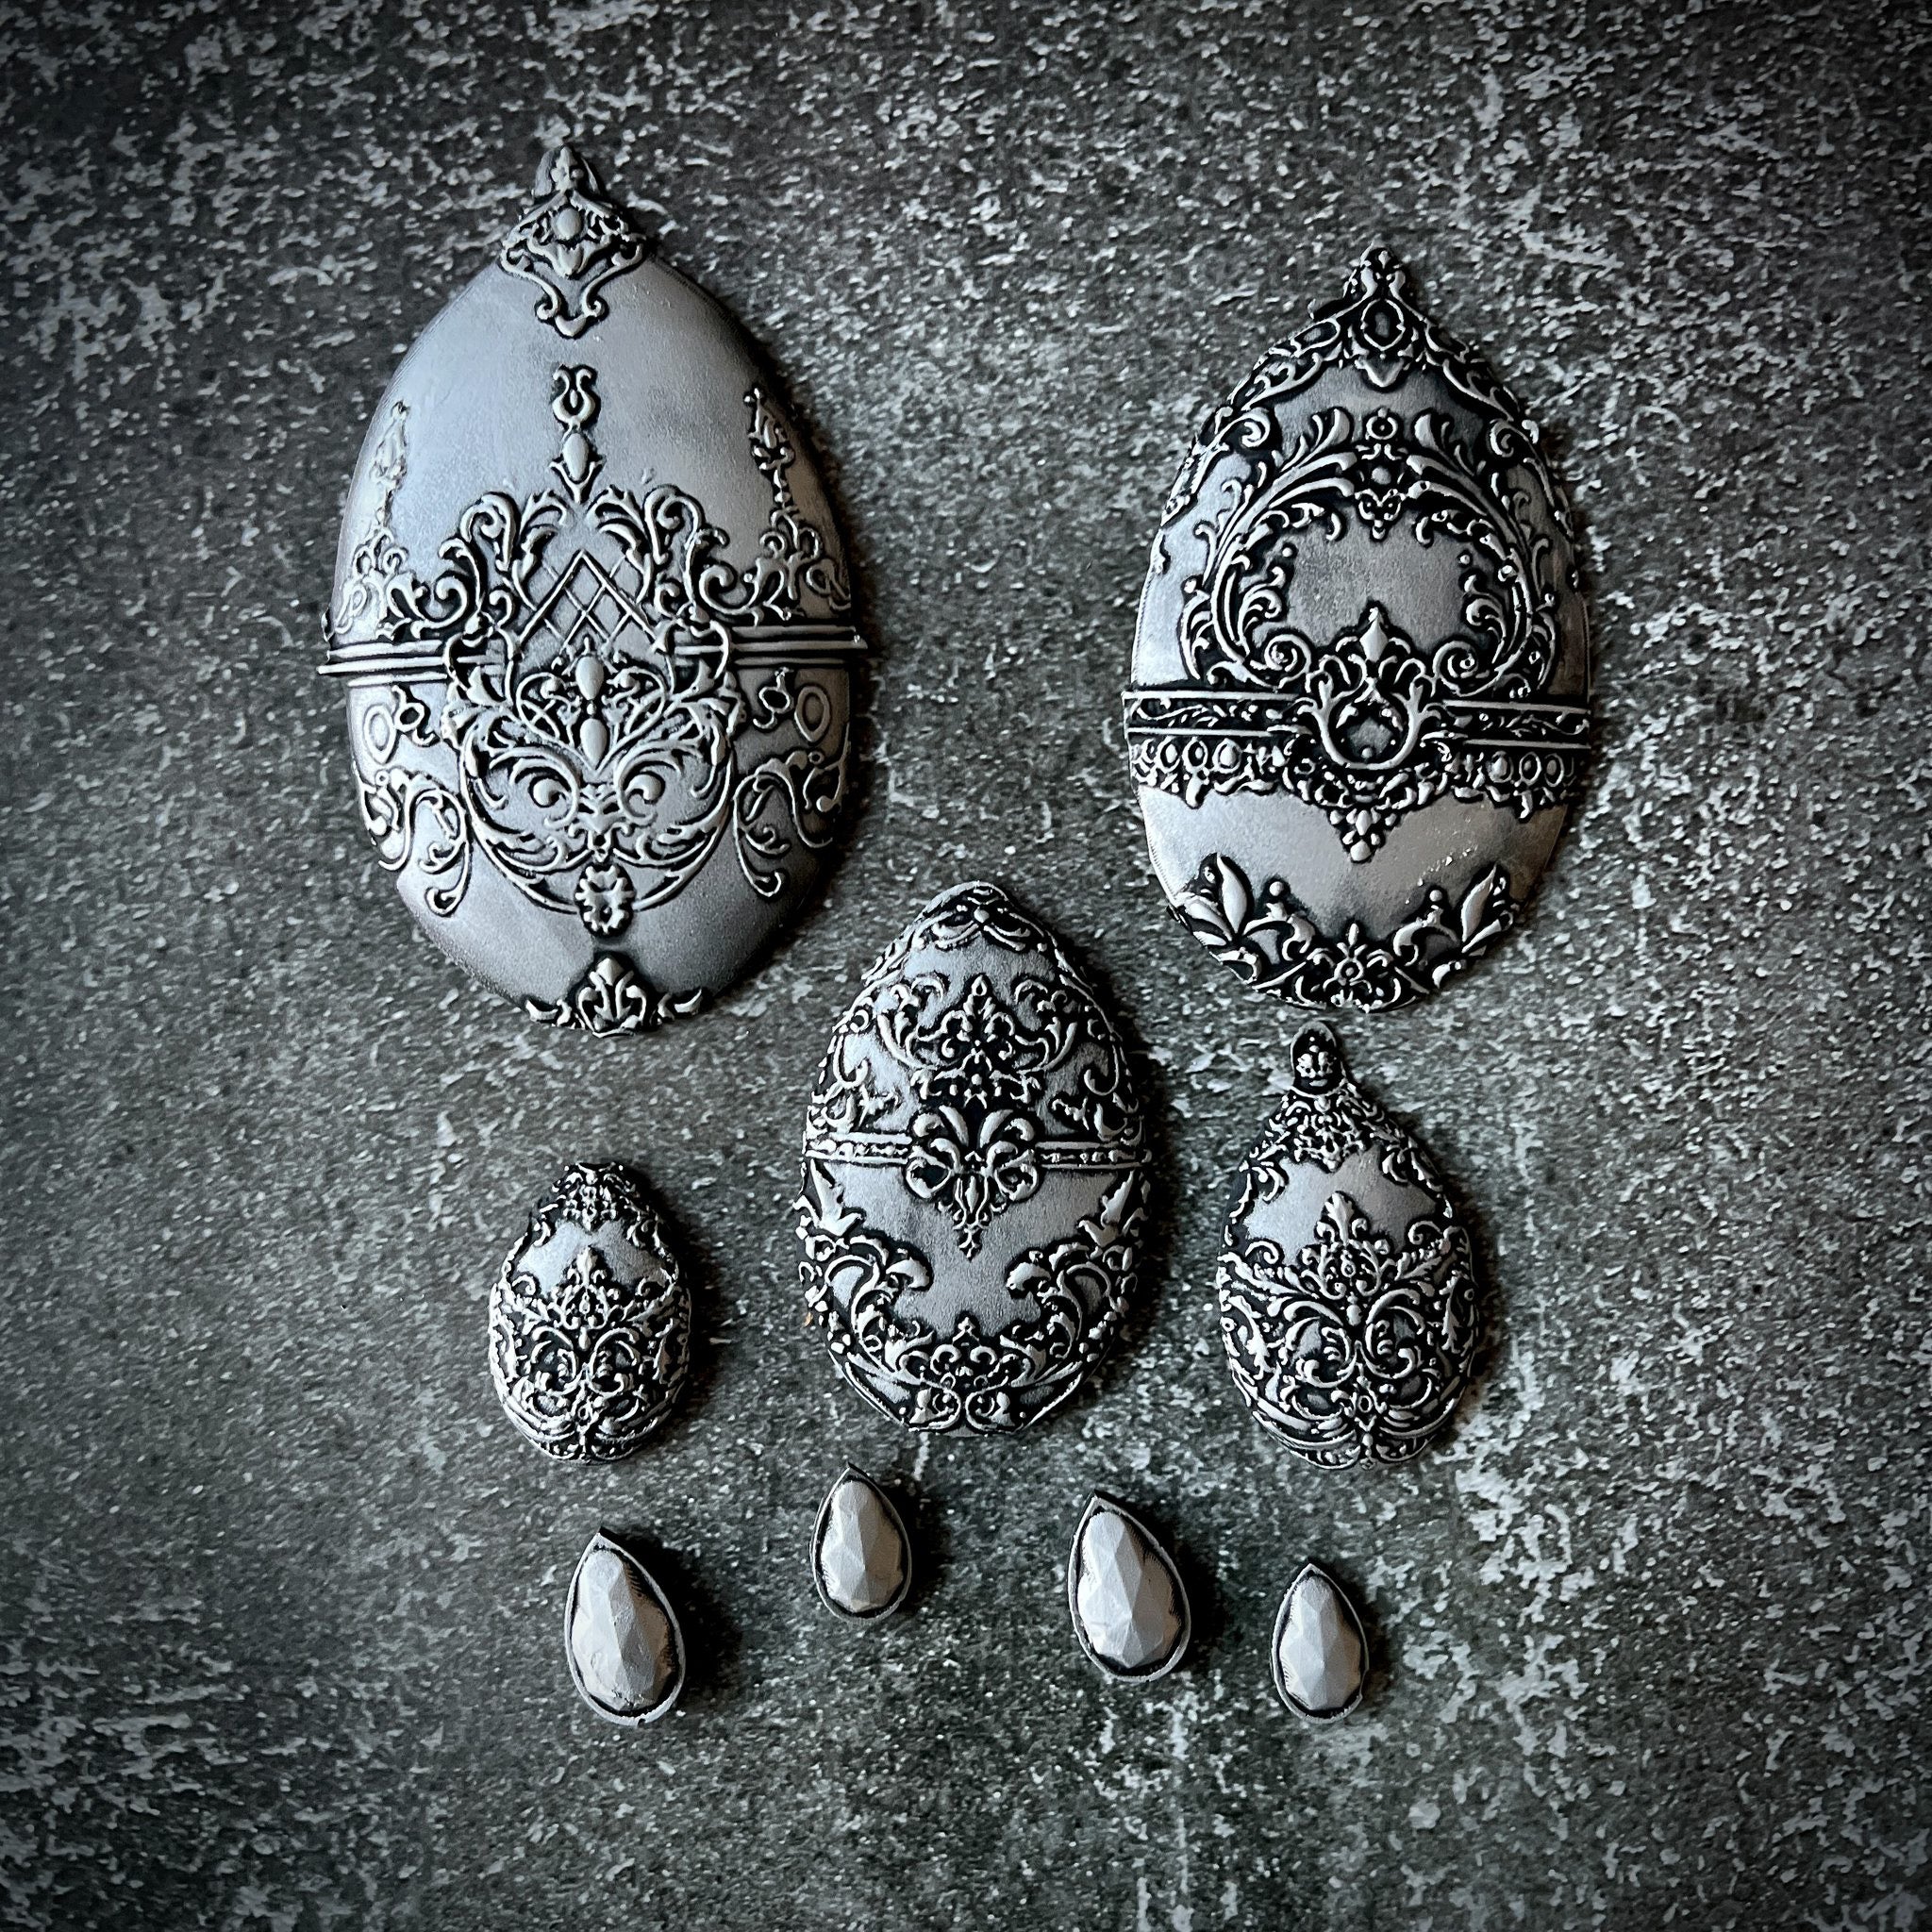 Silver silicone mould castings of 5 varying sizes of ornately decorated Easter eggs and 4 small teardrop pendants are against a textured grey background.